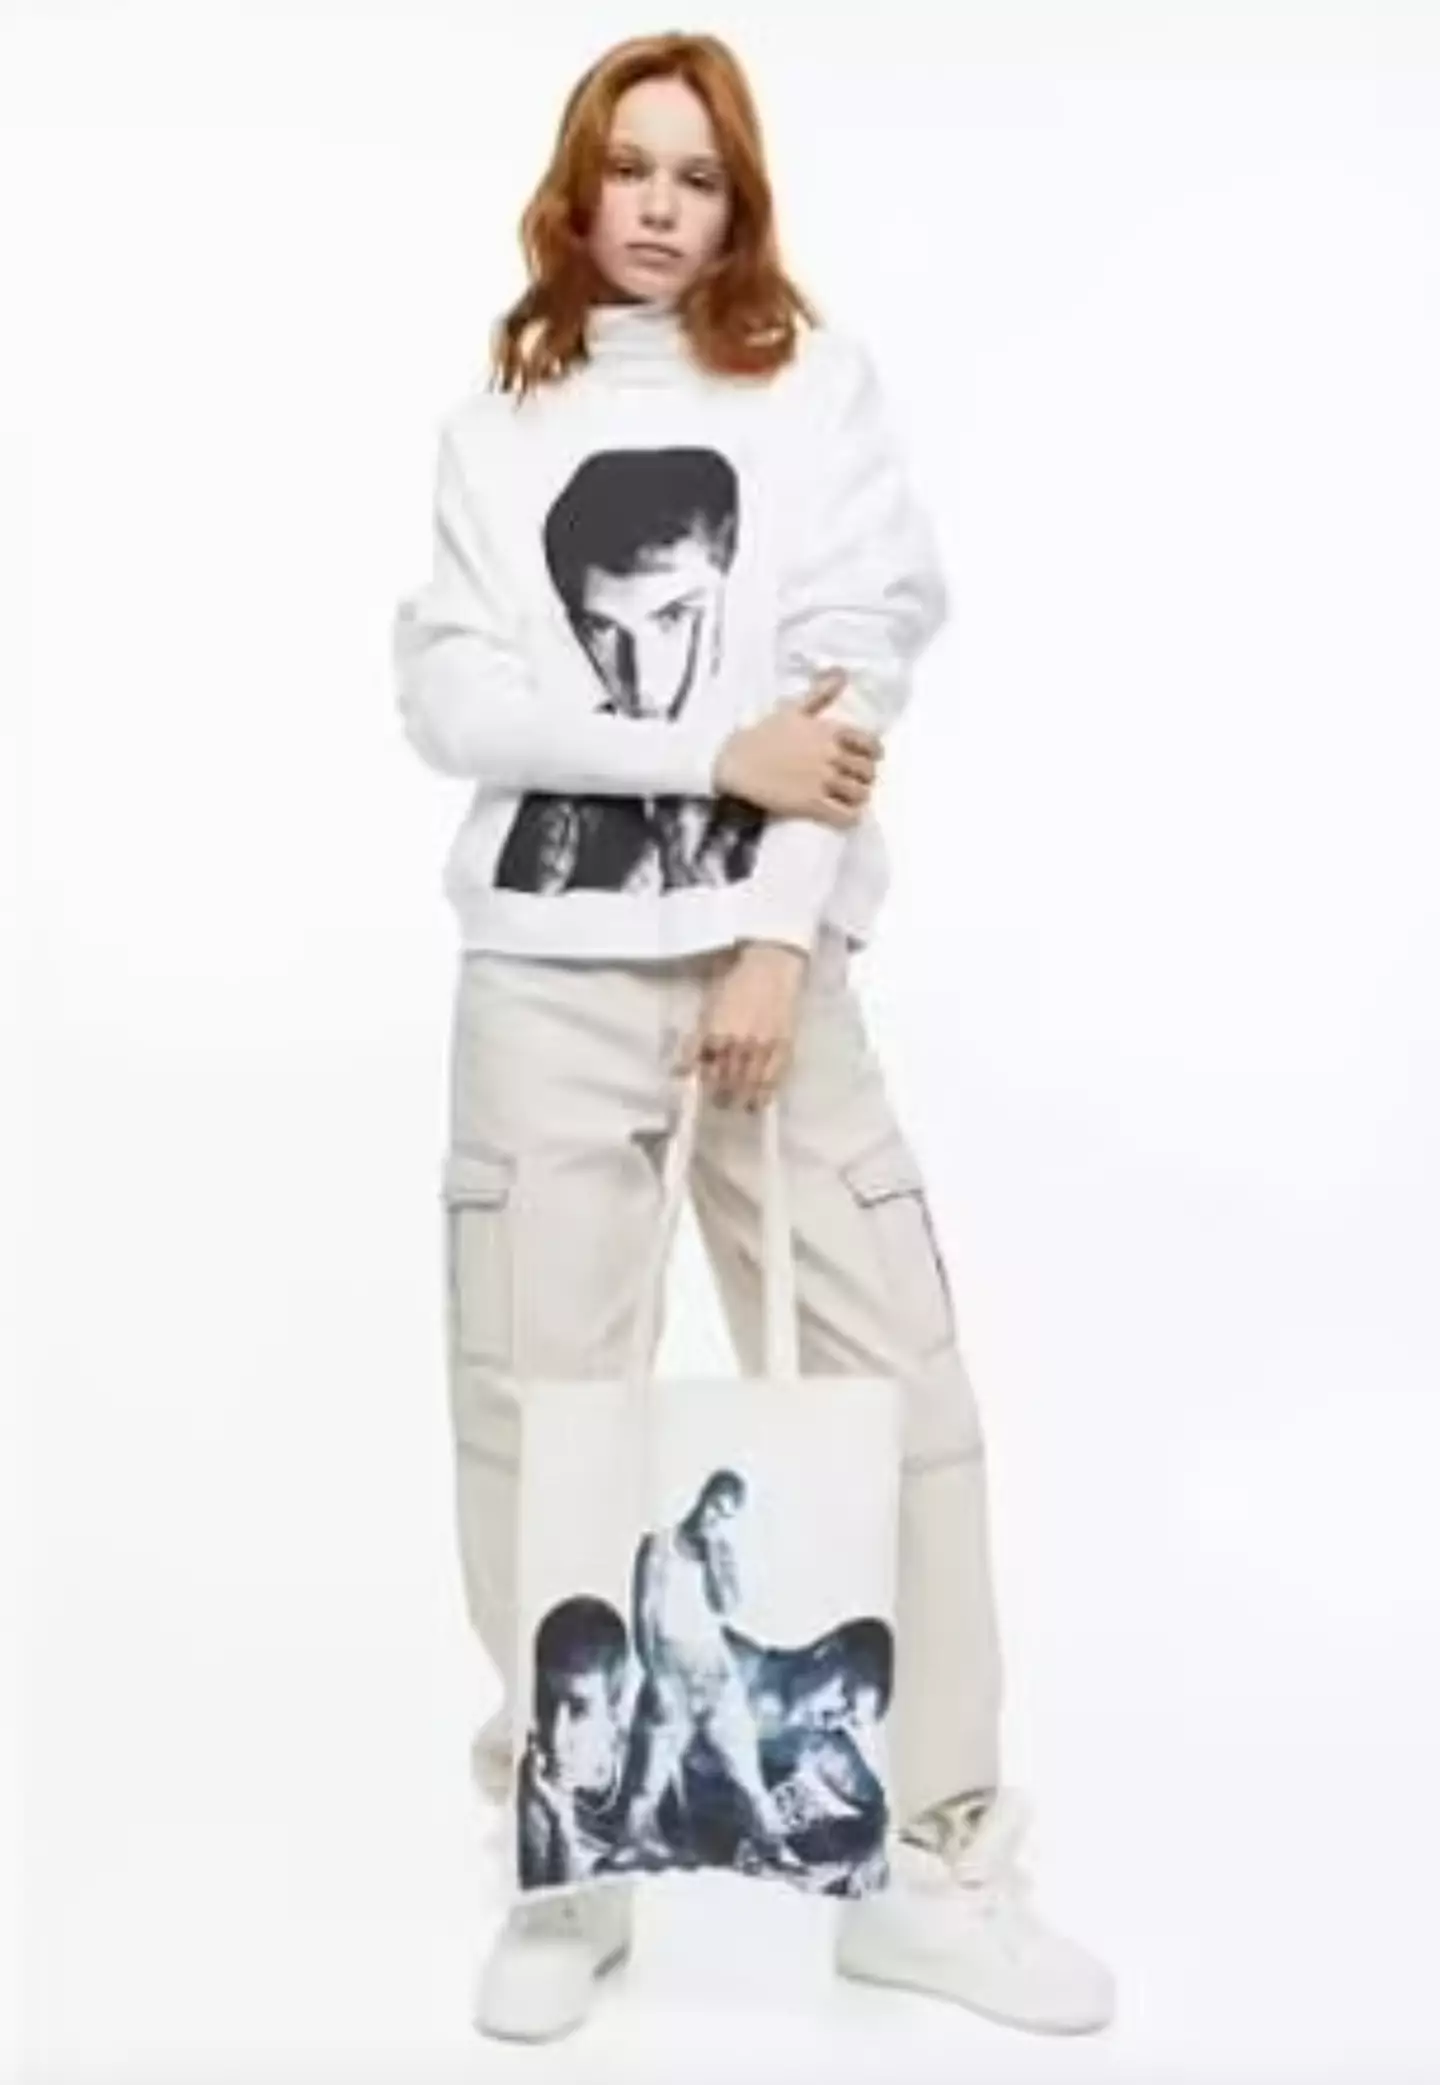 The items feature black-and-white images of Bieber.